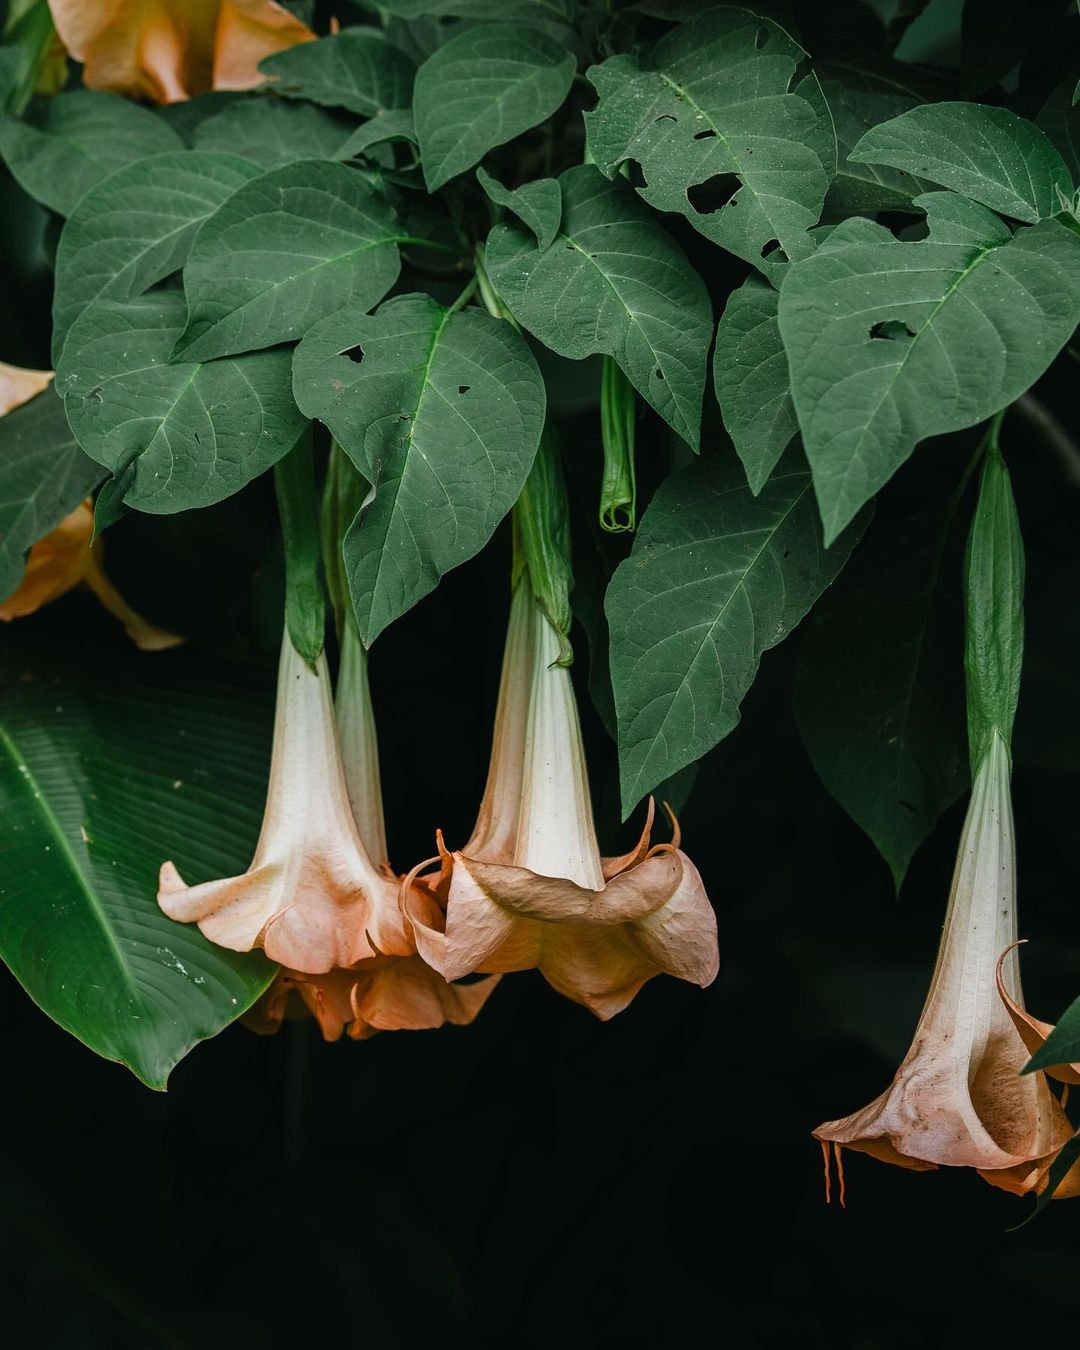 A cluster of Angel's Trumpet flowers with lush green leaves, showcasing their vibrant beauty.